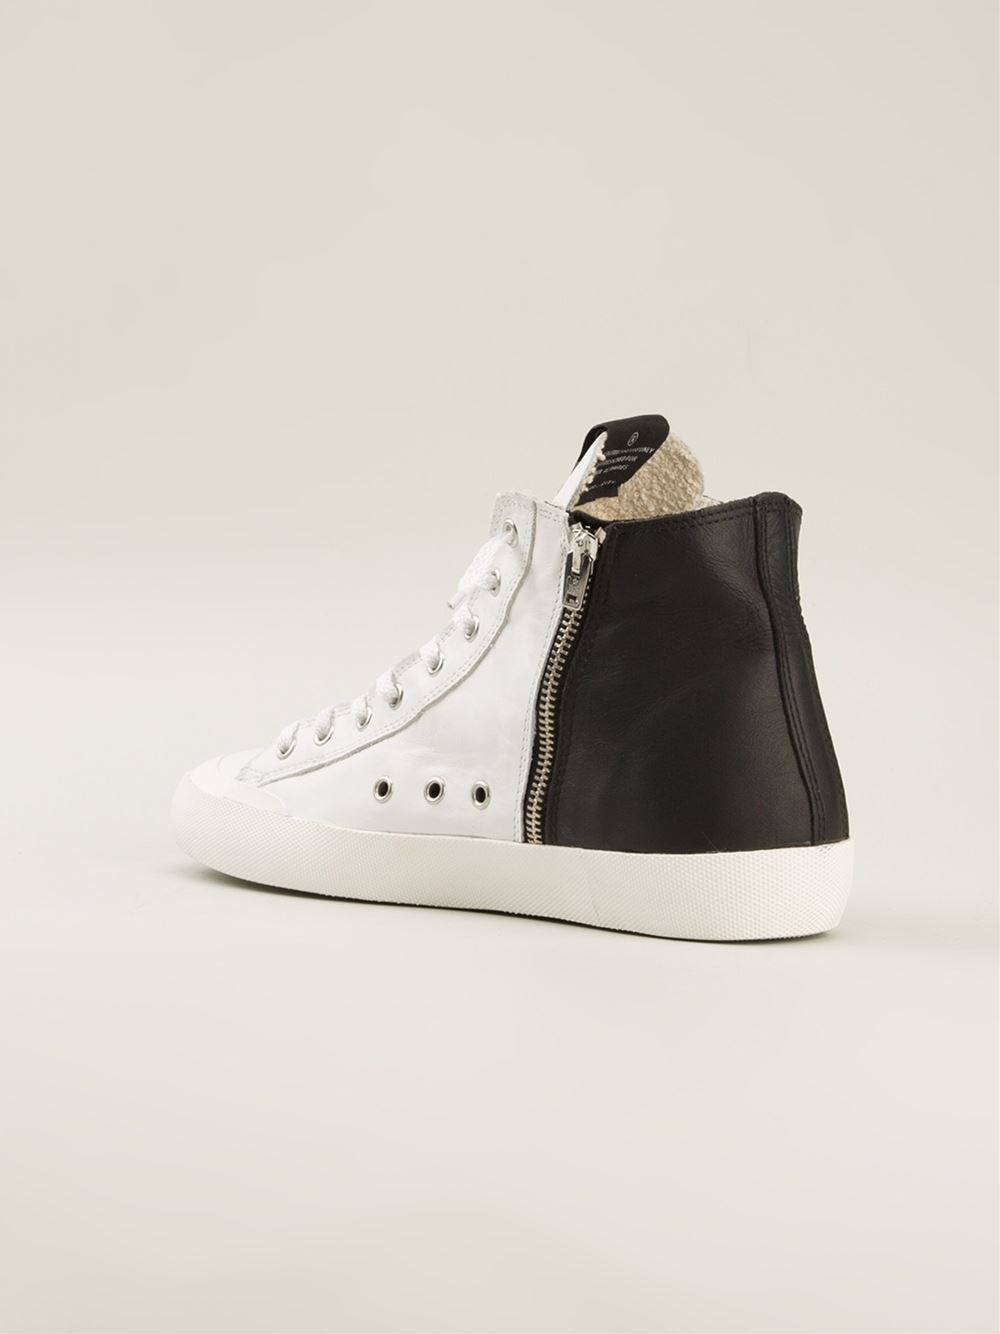 golden goose sneakers limited edition| DS Hair Studio